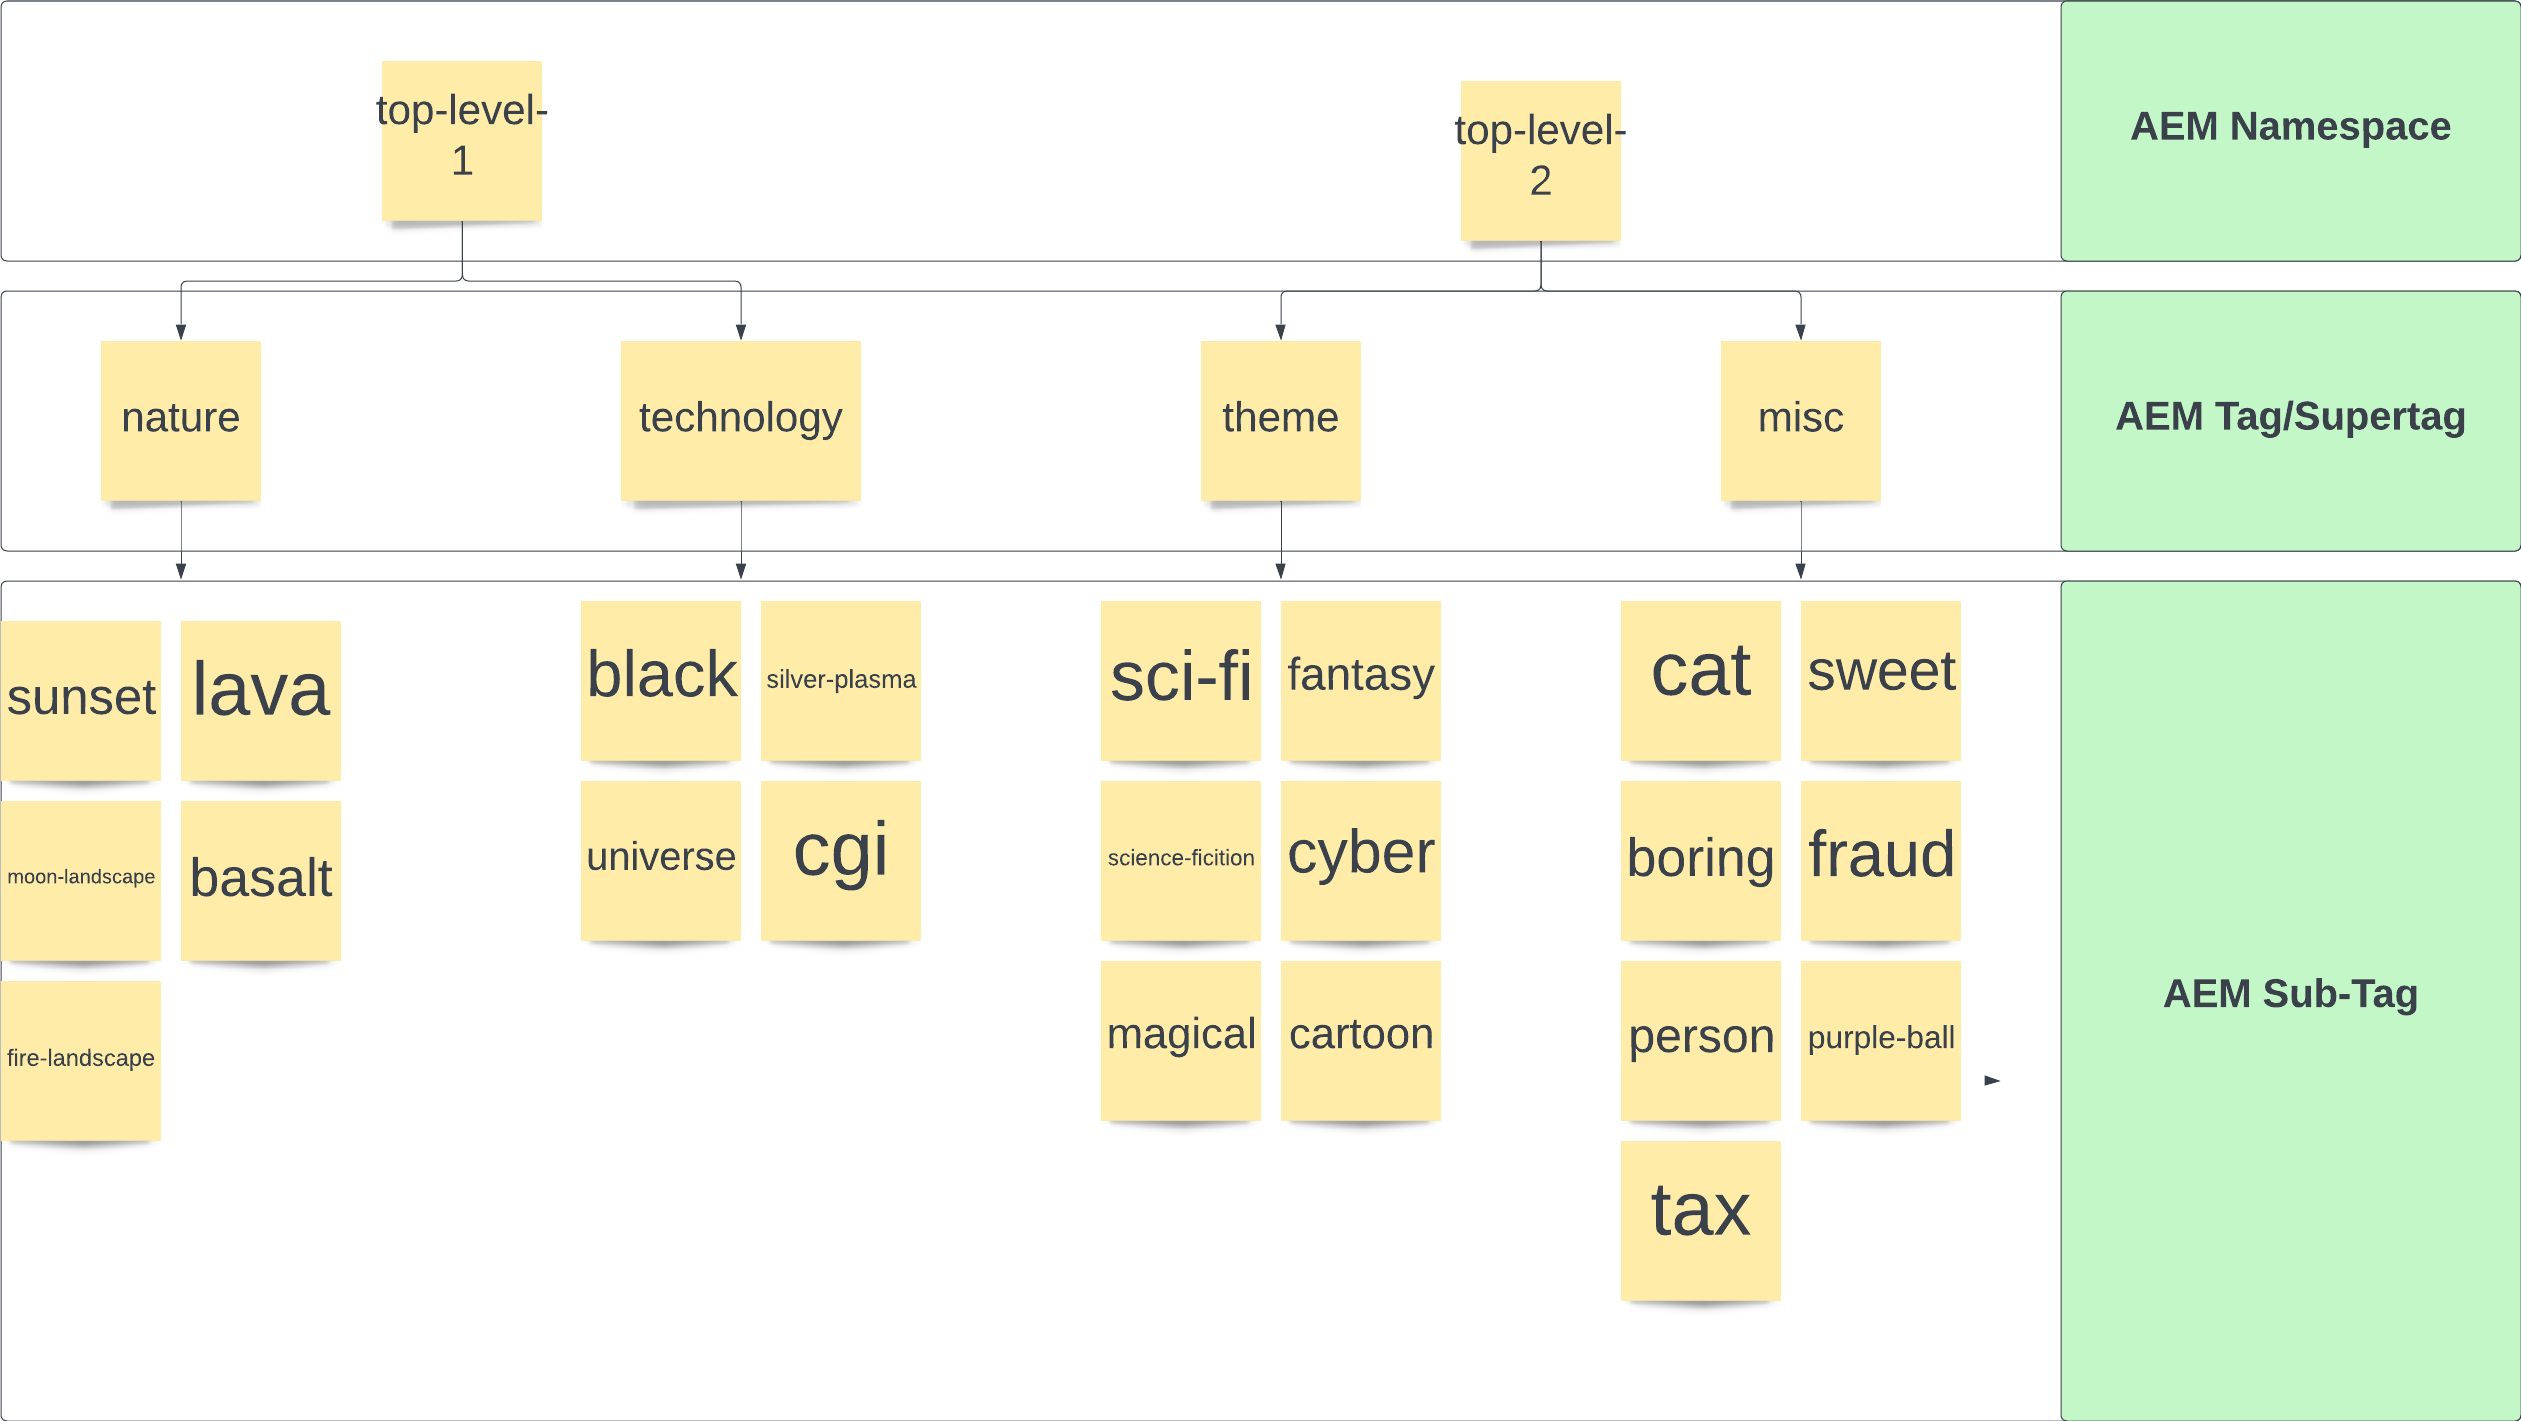 Picture showing a asset taxonomy